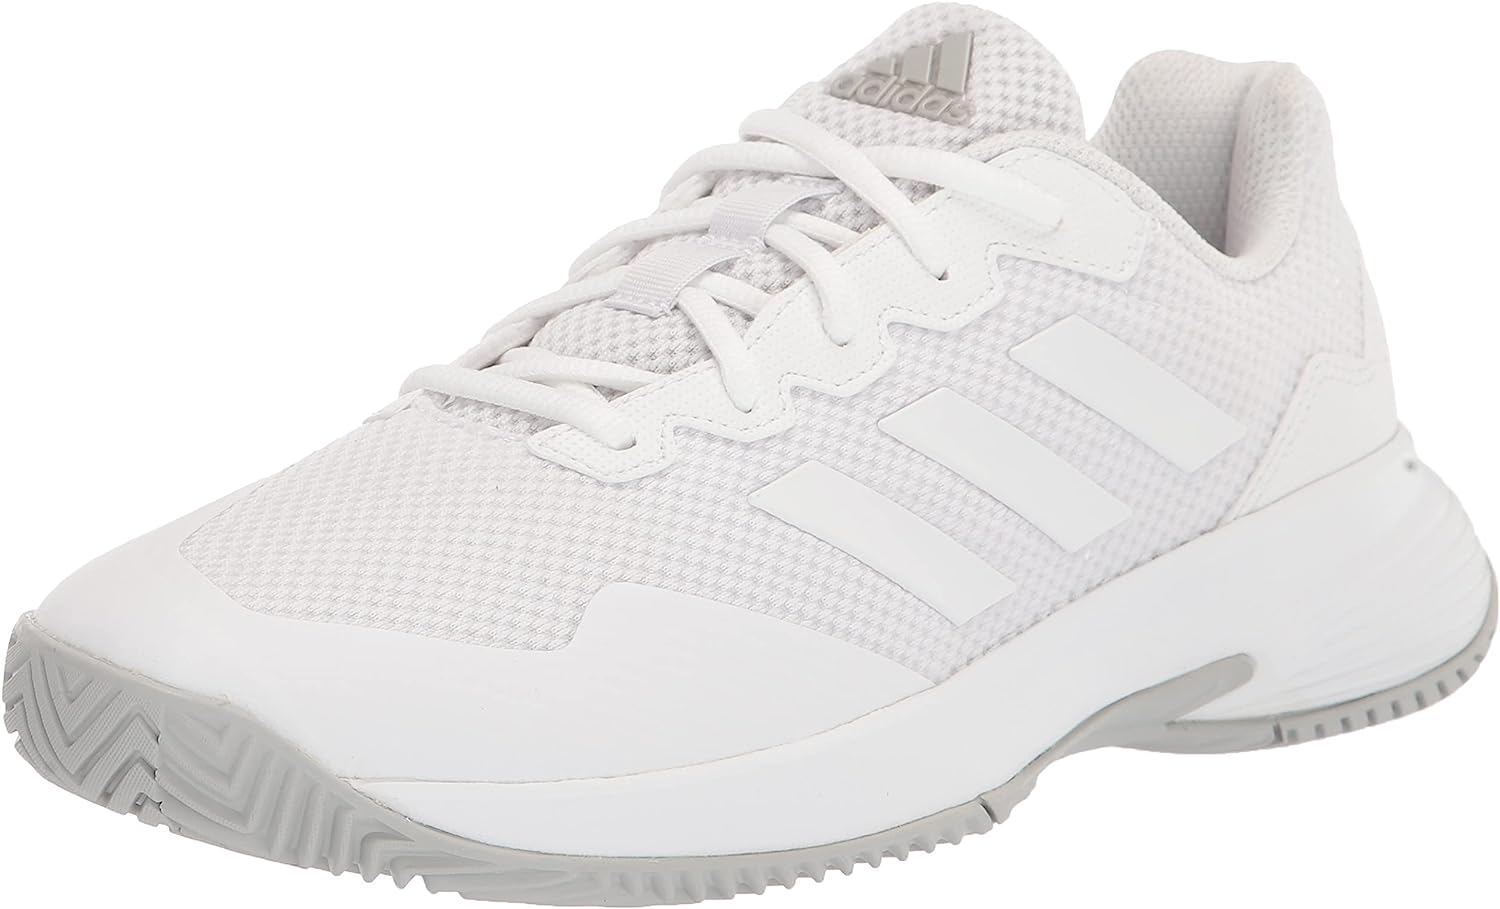 Top 10 Rated Best Tennis Court Shoes Latest Reviews and Comparisons